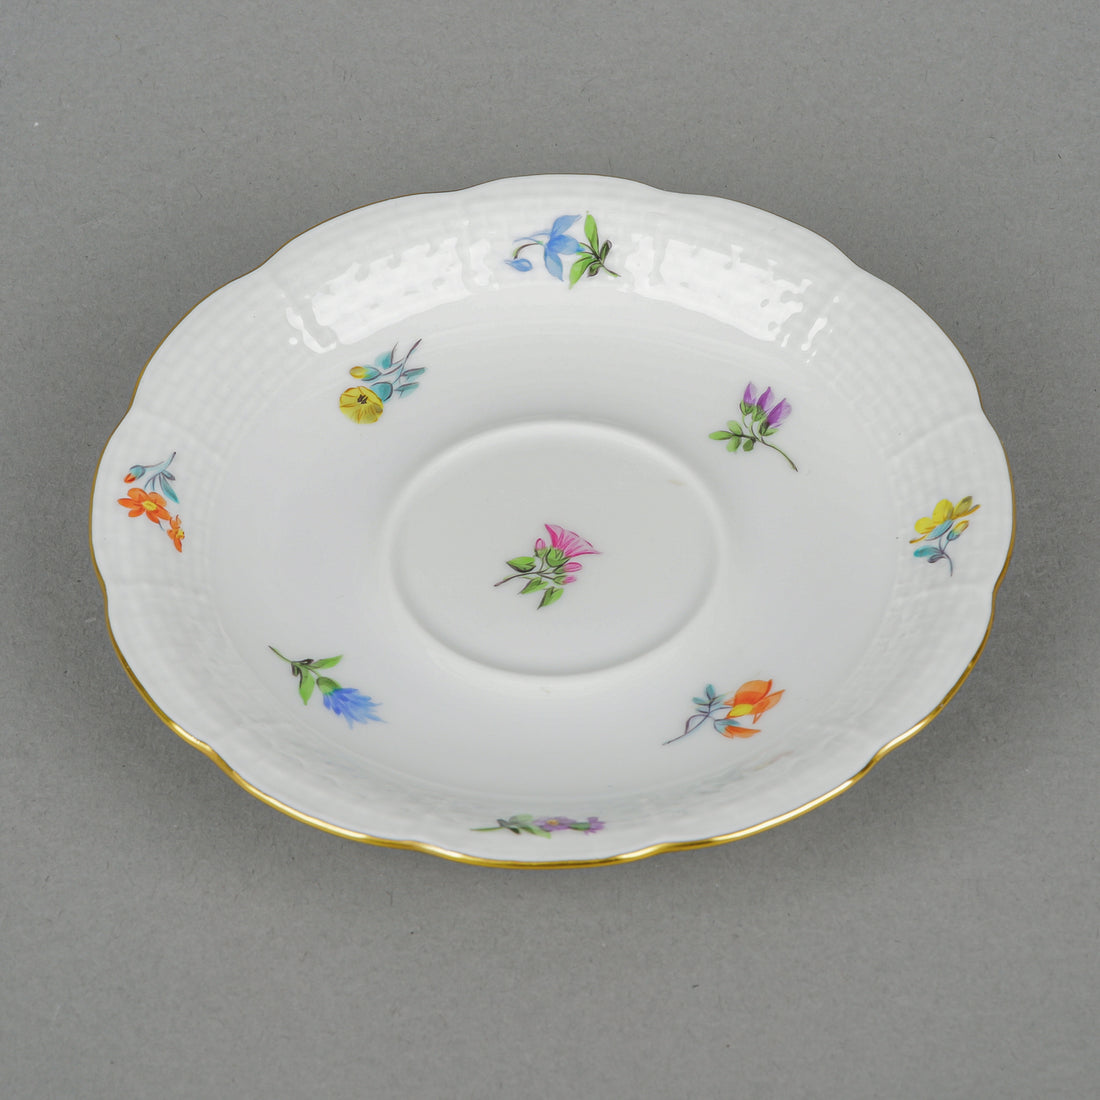 HEREND Cup & Saucer 734 Scattered Flowers